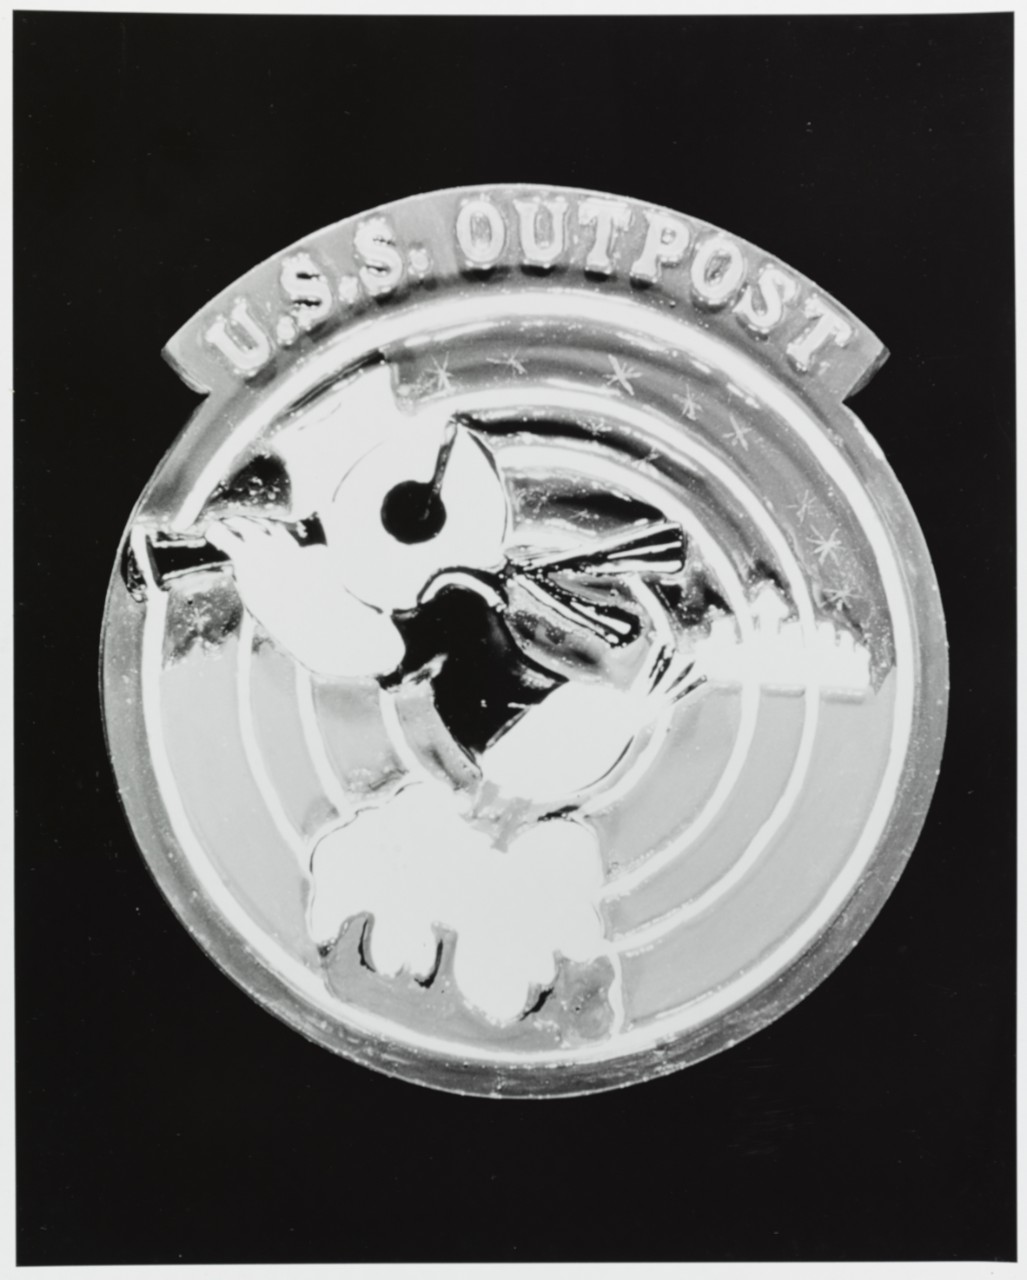 Insignia: USS OUTPOST (AGR-10)